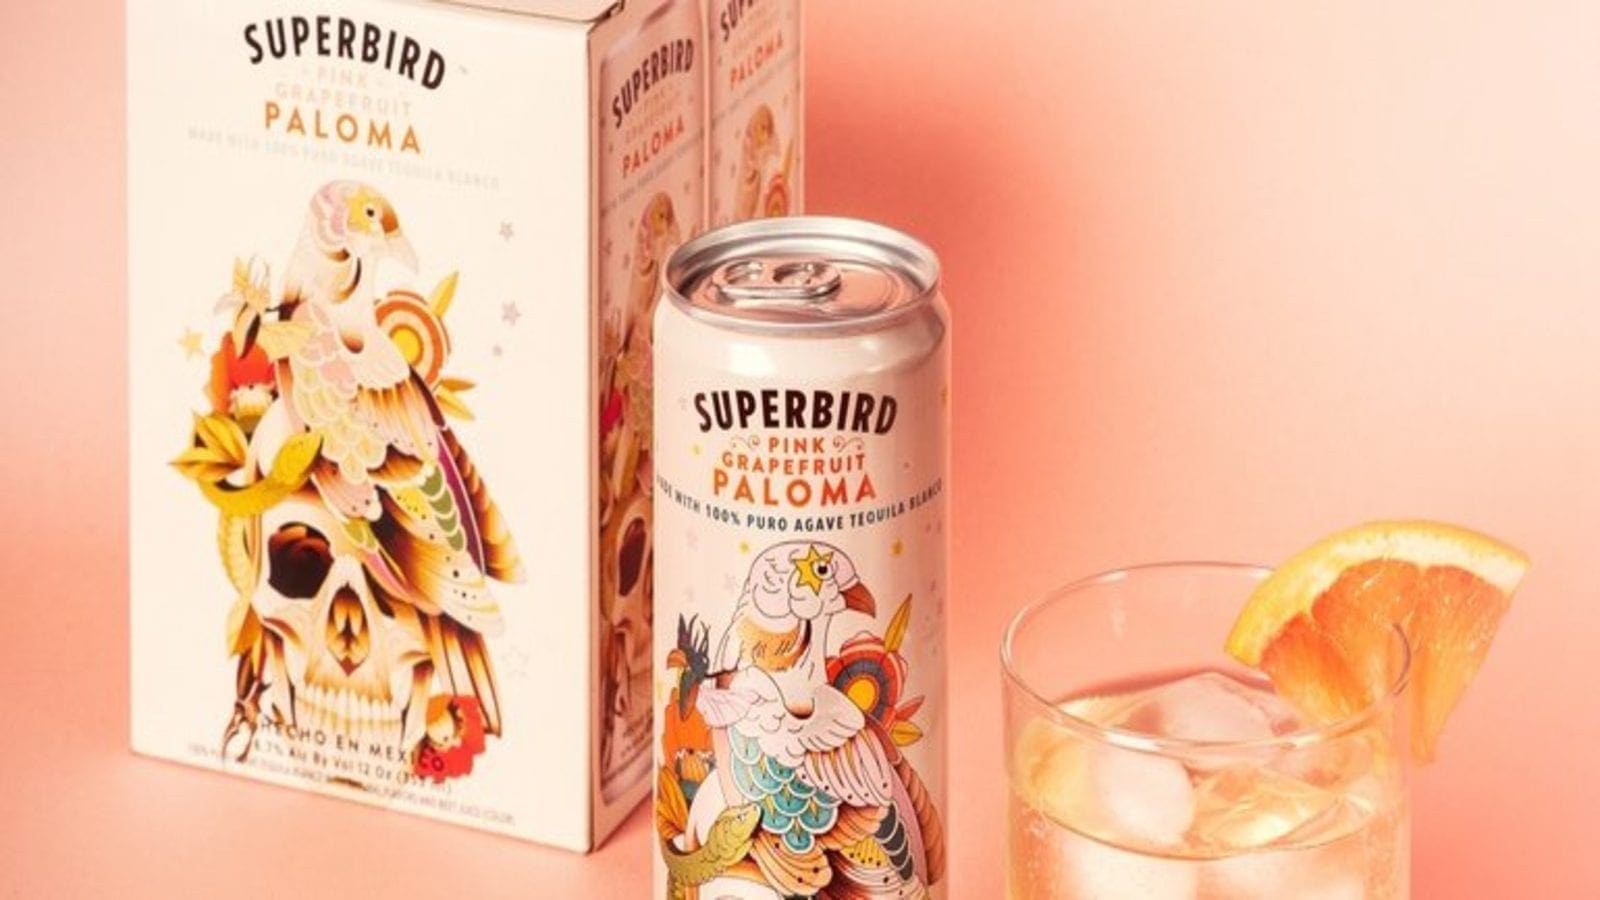 Molson Coors enters agreement to distribute Superbird ready-to-drink spirit across US markets